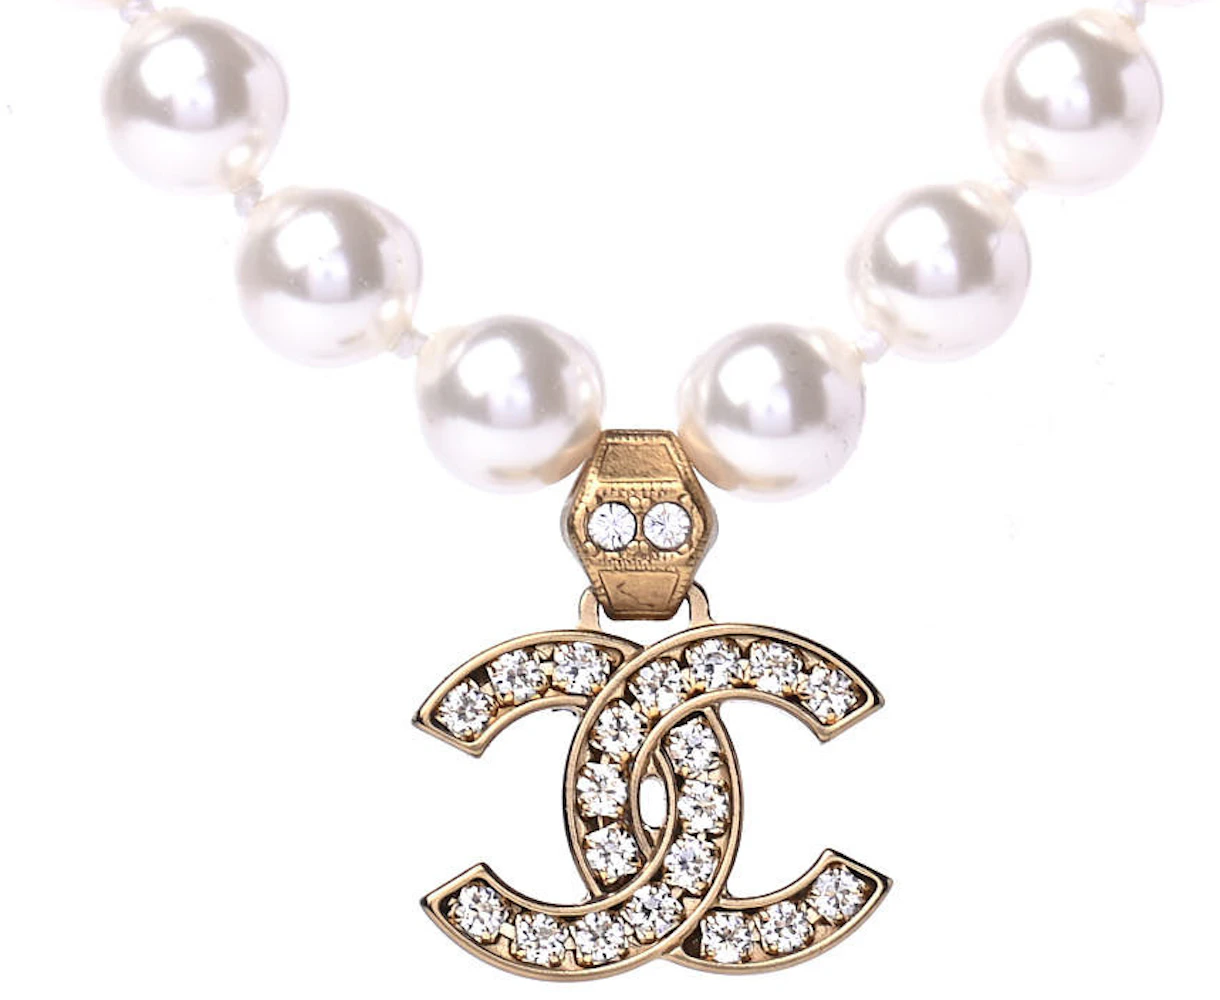 CHANEL 22S CC Pearl/ Crystals Chain Link Choker Necklace